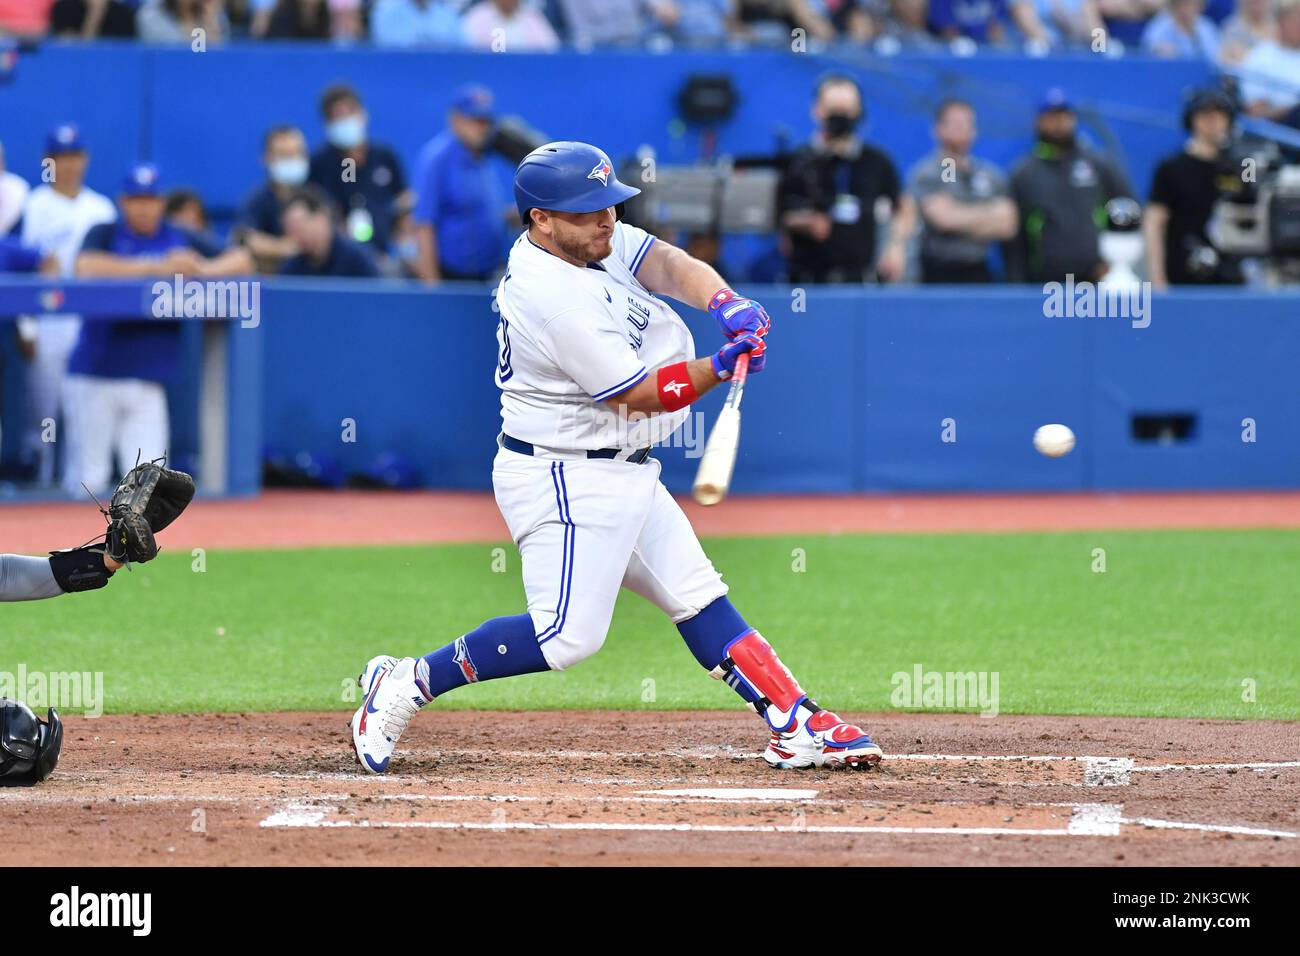 TORONTO, ON - MAY 31: Toronto Blue Jays catcher Alejandro Kirk (30) hits  line drive towards third base during the MLB regular season game between  the Chicago White Socks and the Toronto